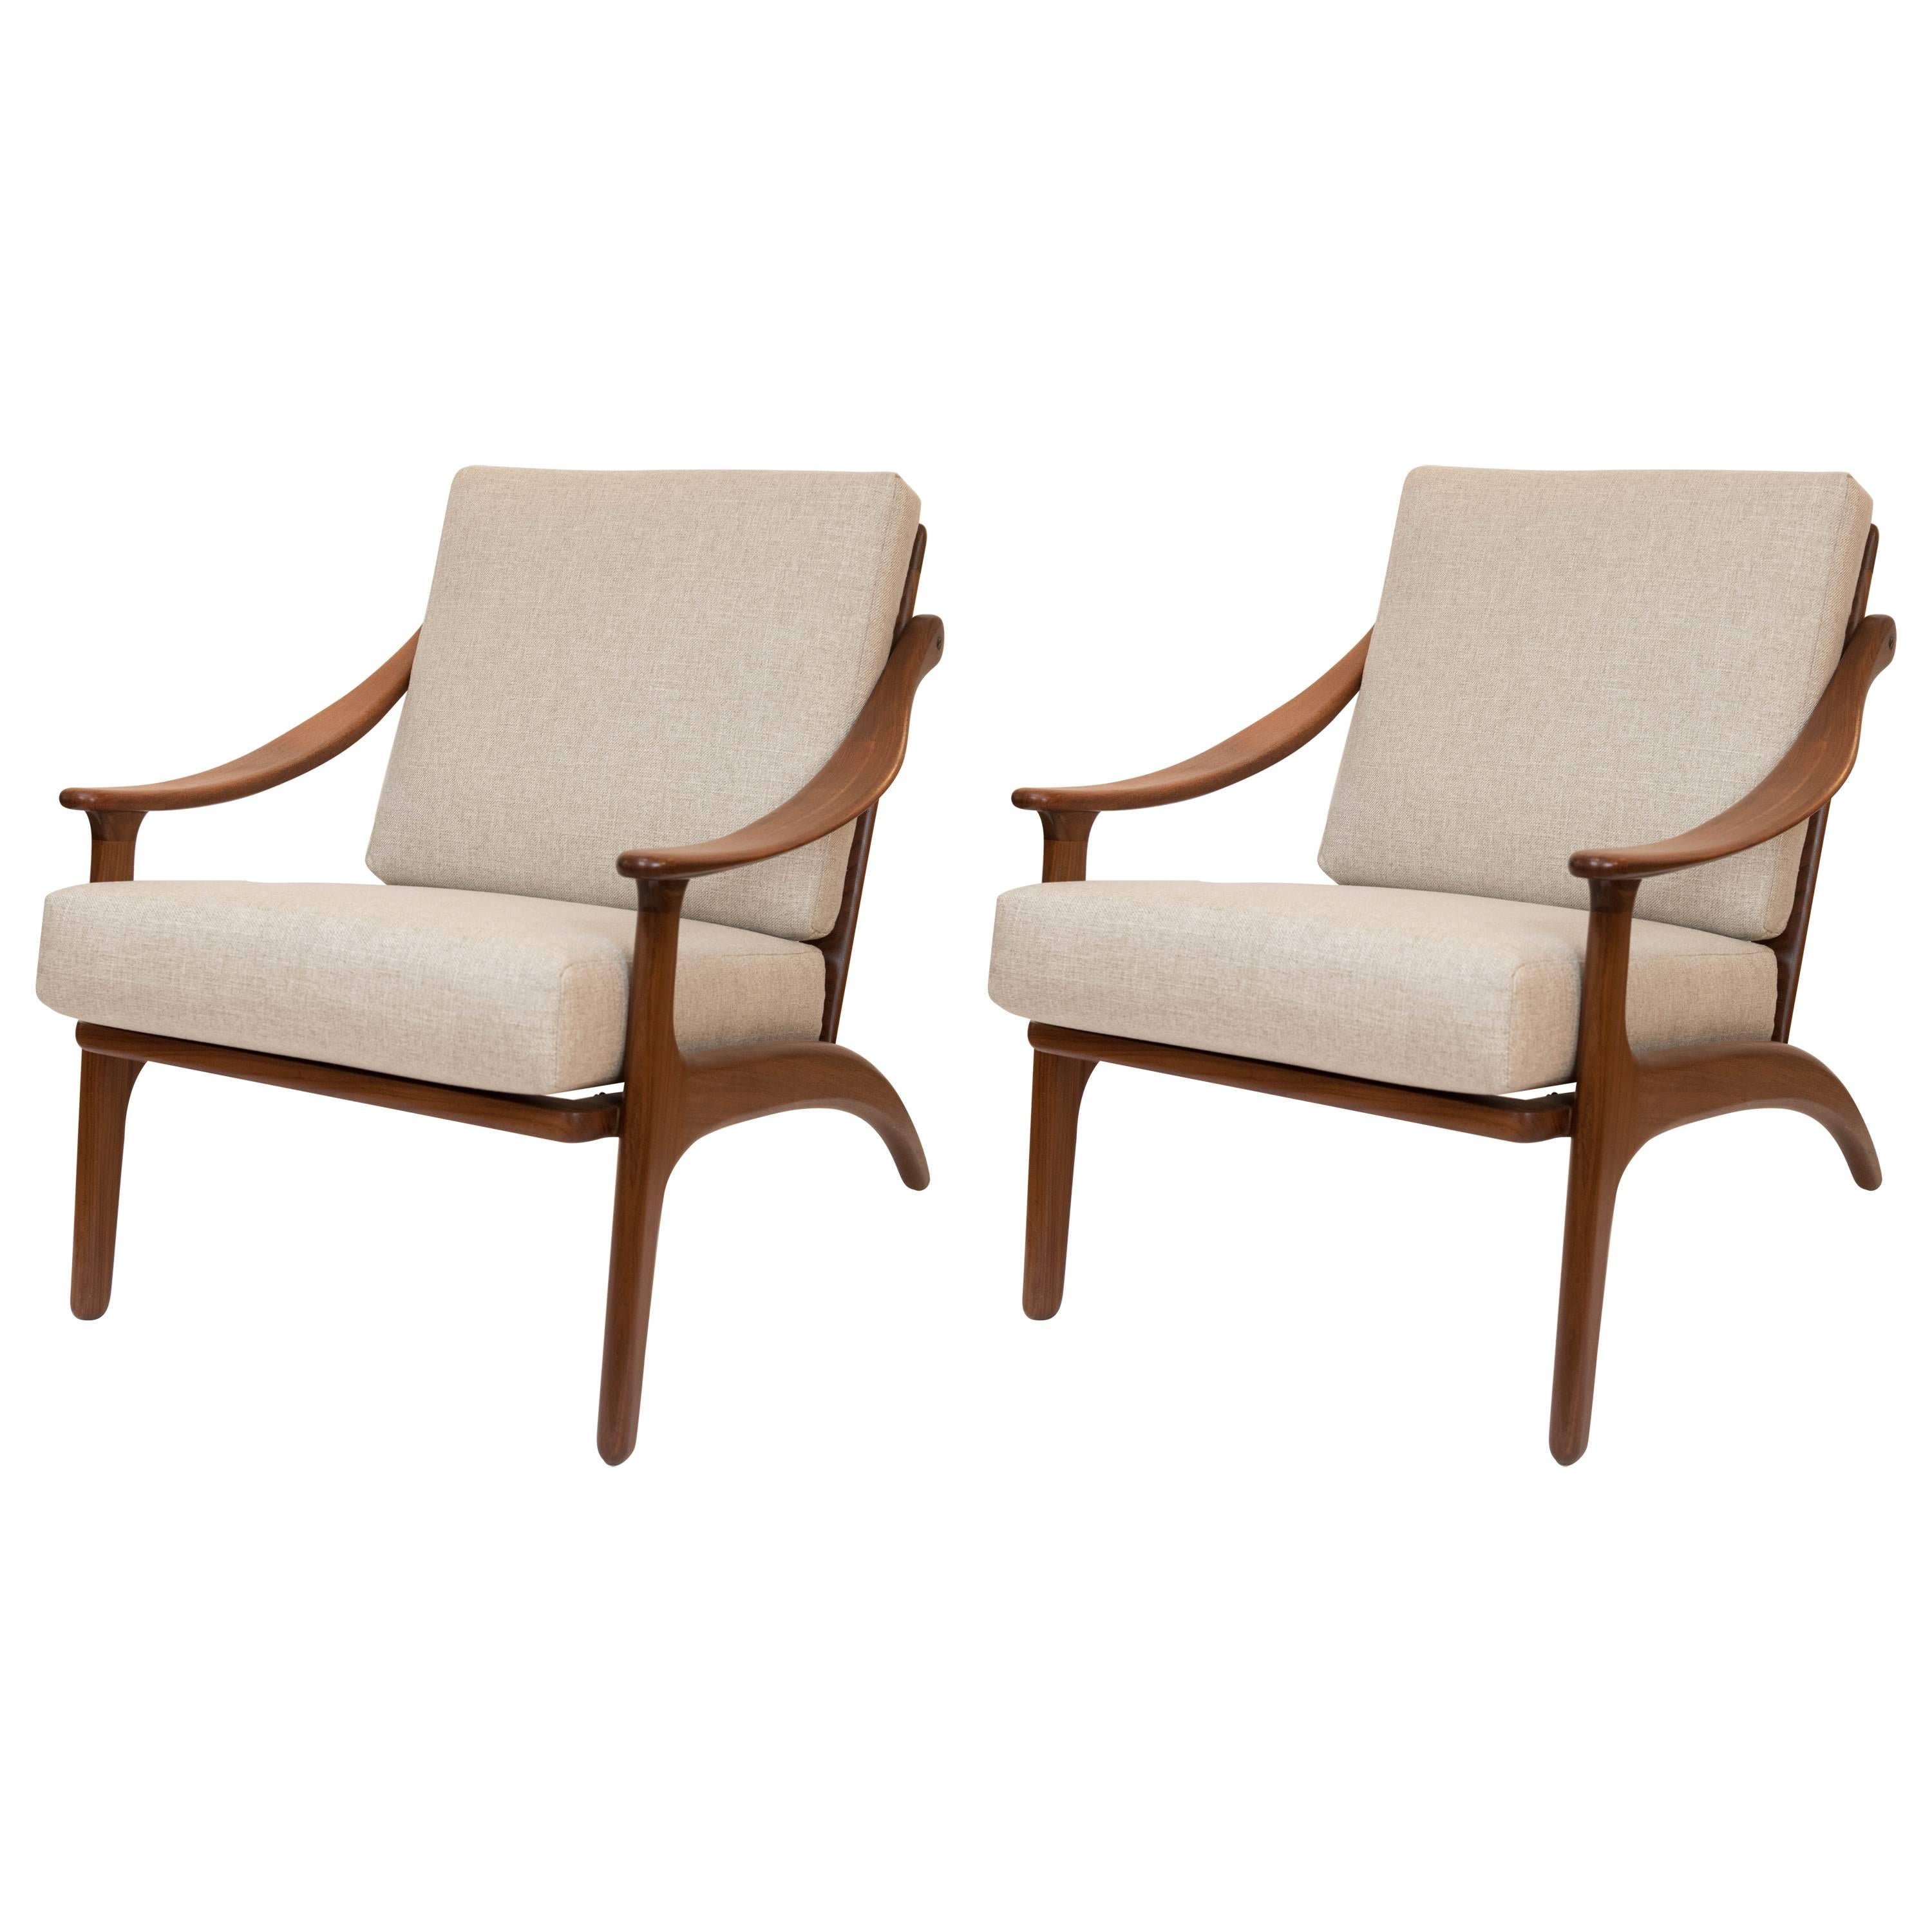 Pair of Mid-Century Teak Lounge Chairs from Denmark